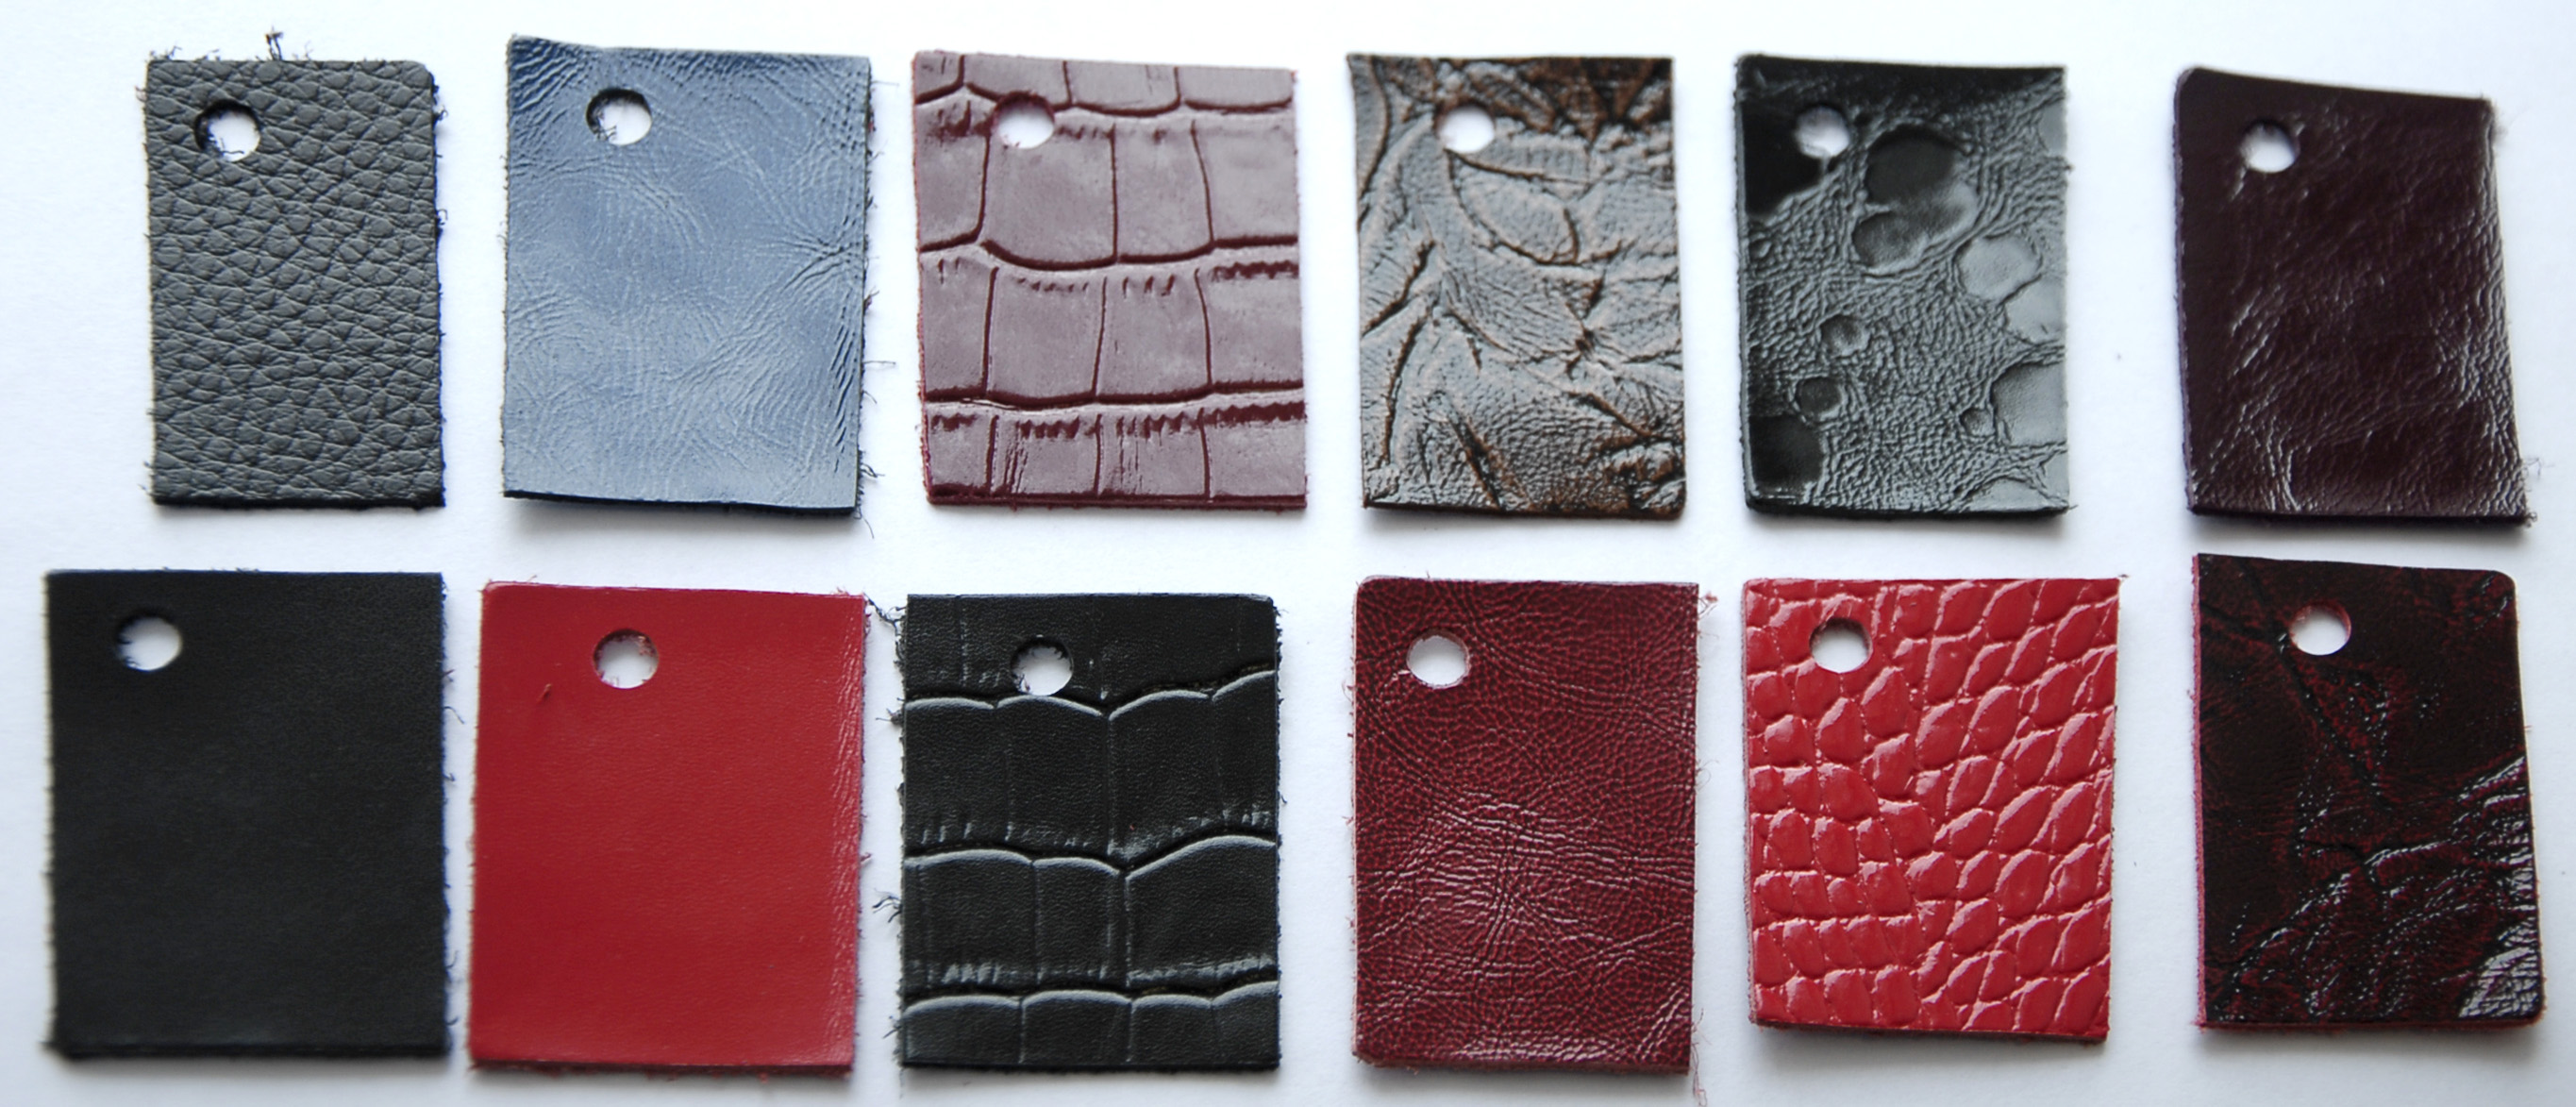 Bonded Leather Wikipedia, Recycled Leather Fabric